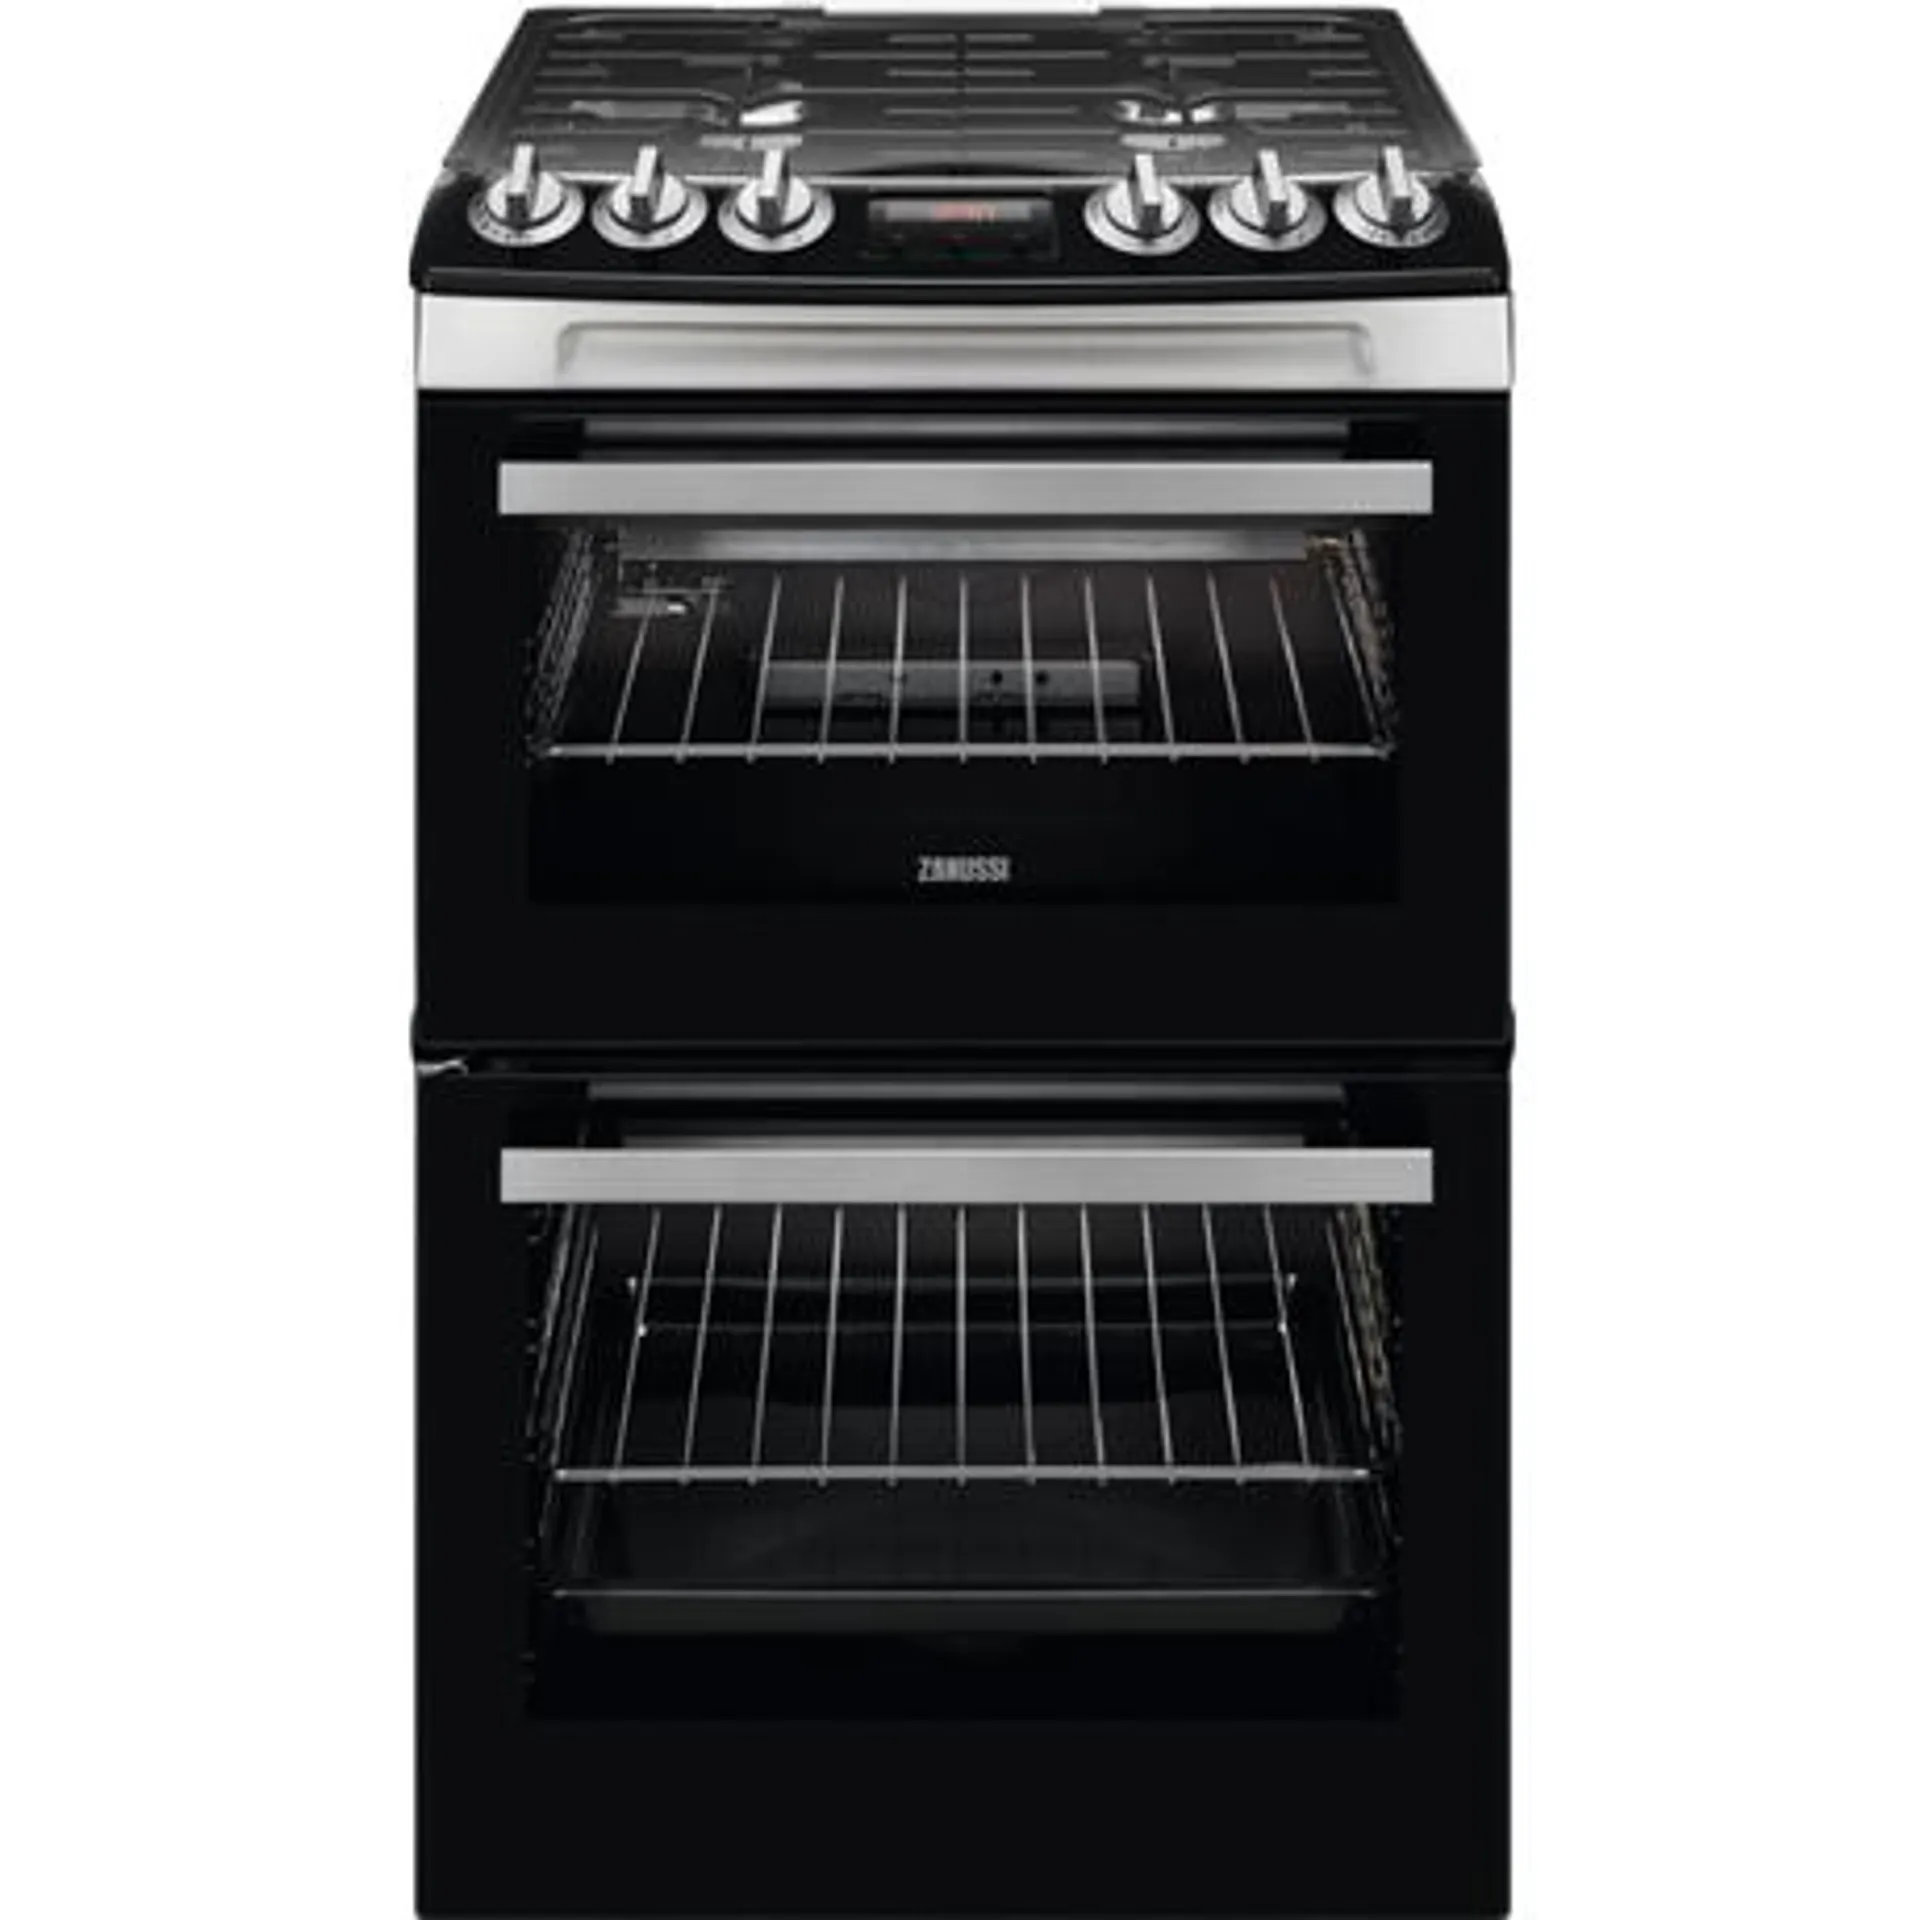 Zanussi ZCG43250XA 55cm Double Oven Gas Cooker with Gas Hob - Stainless